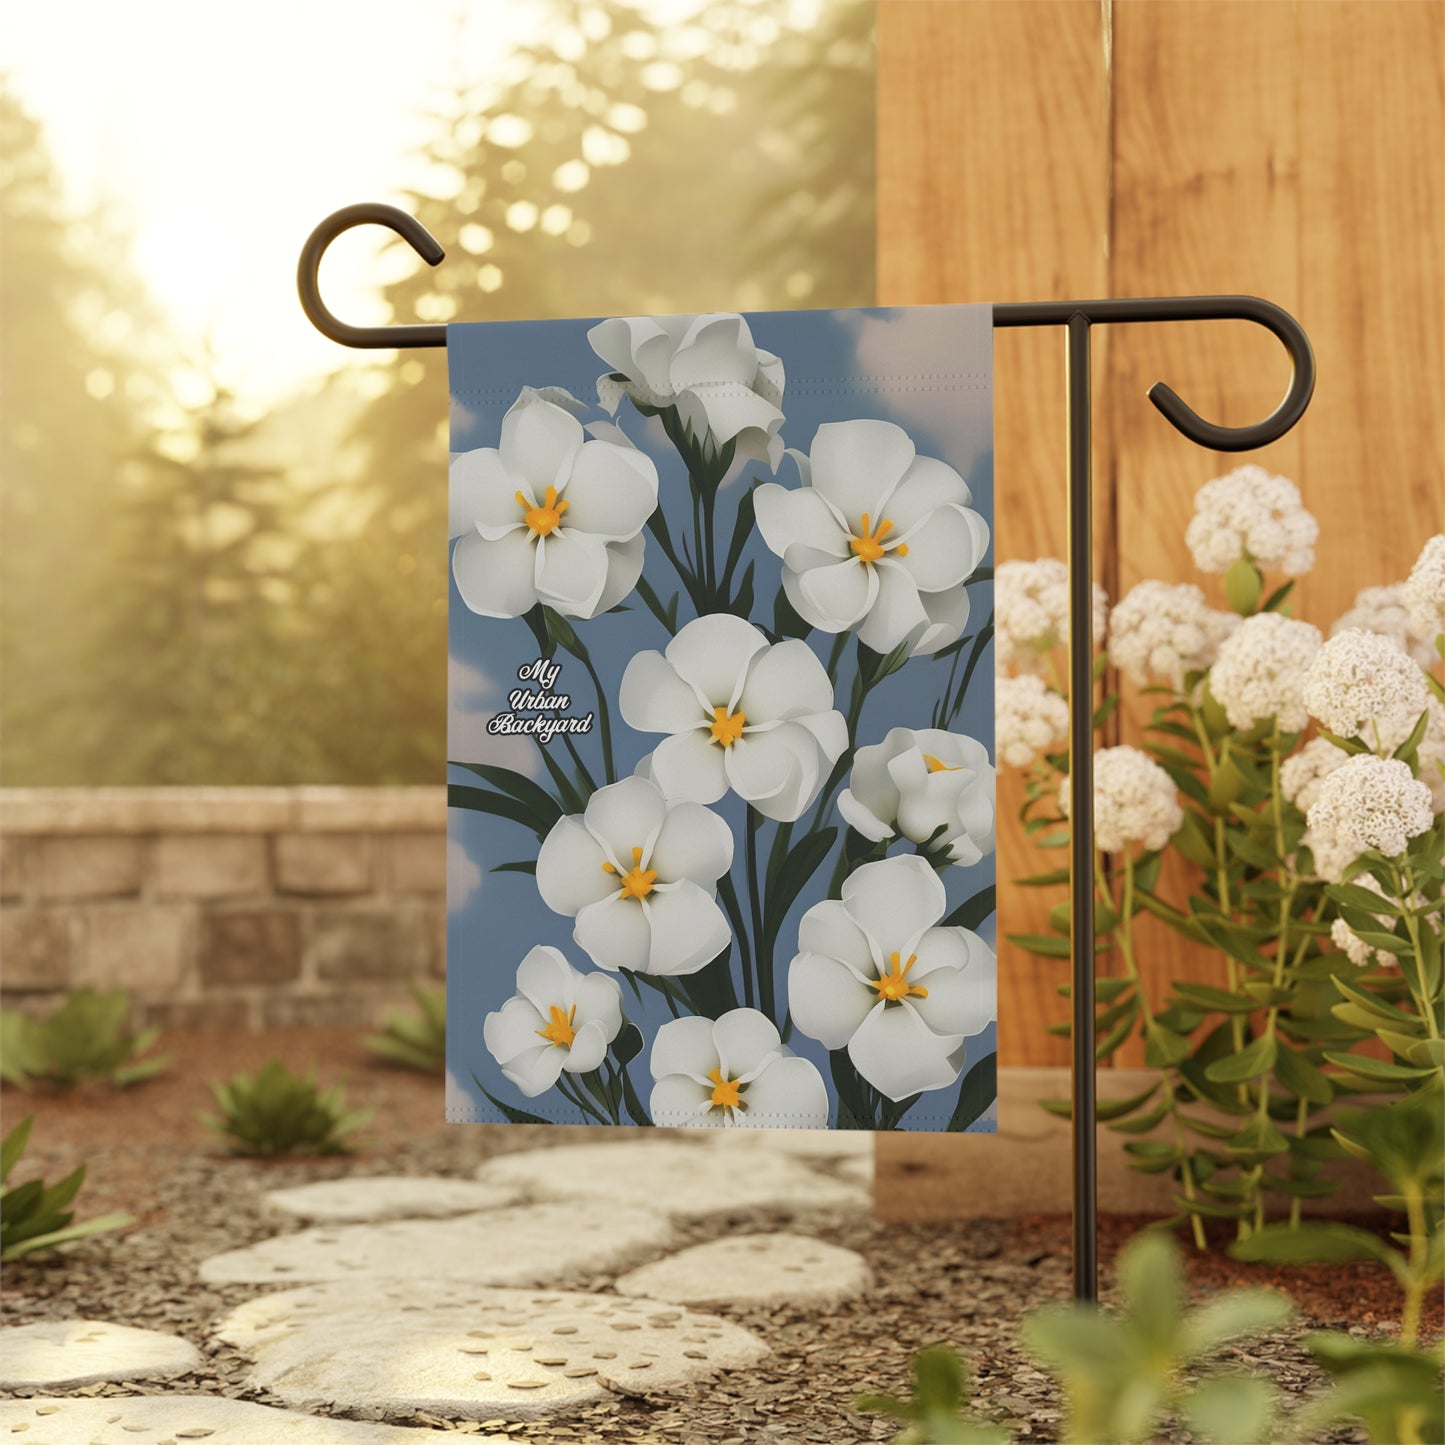 Outdoor Garden Flag for Yard, Patio or Work Decor, Double Sided, Vertical, Flag only - White Flowers